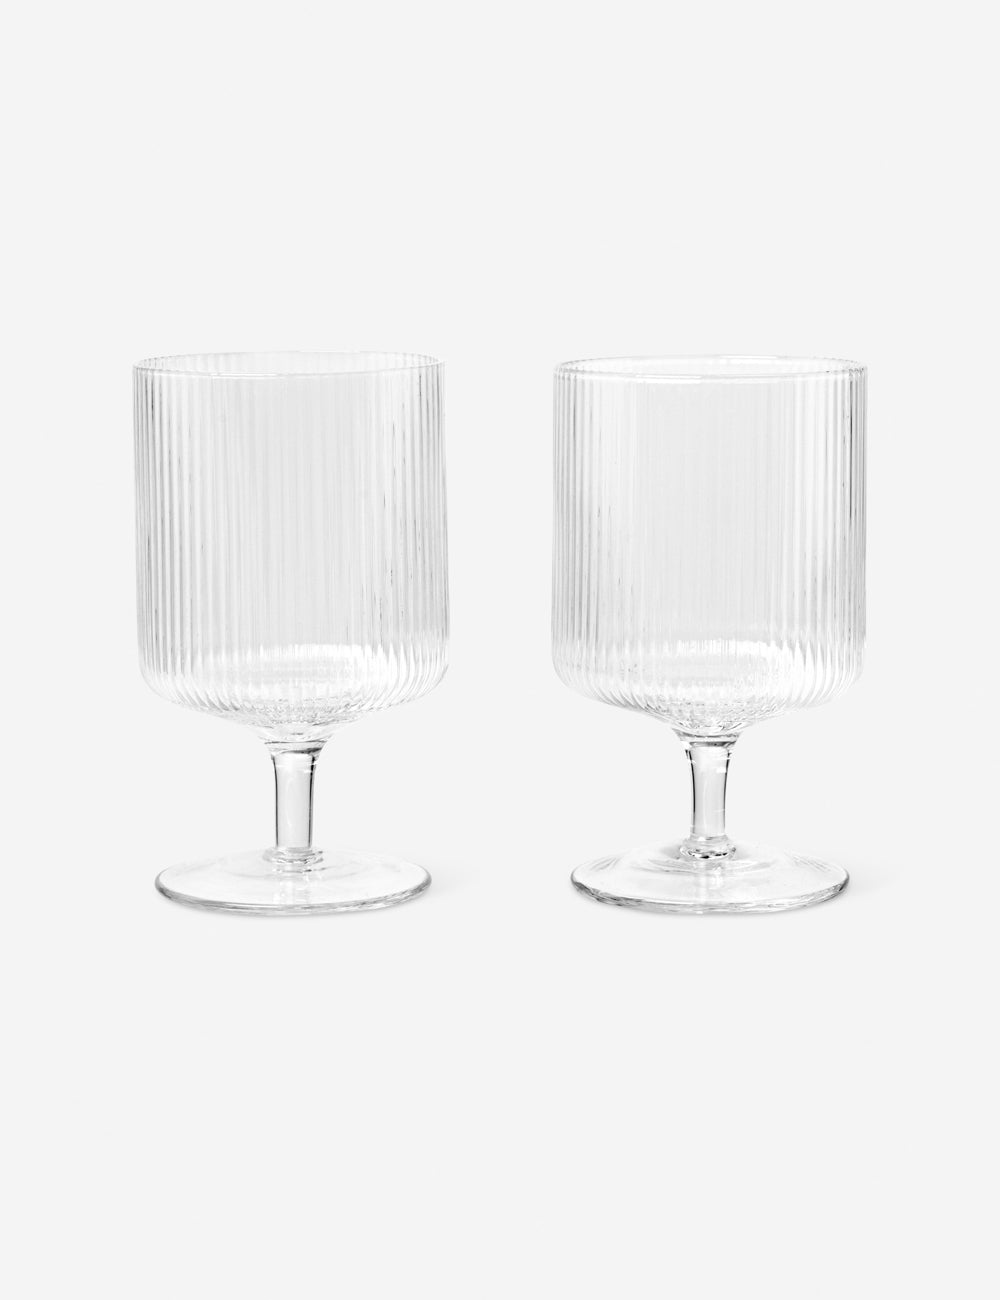 Clear Striped Glass Cup Ripple Drinking Glasses Modern Kitchen